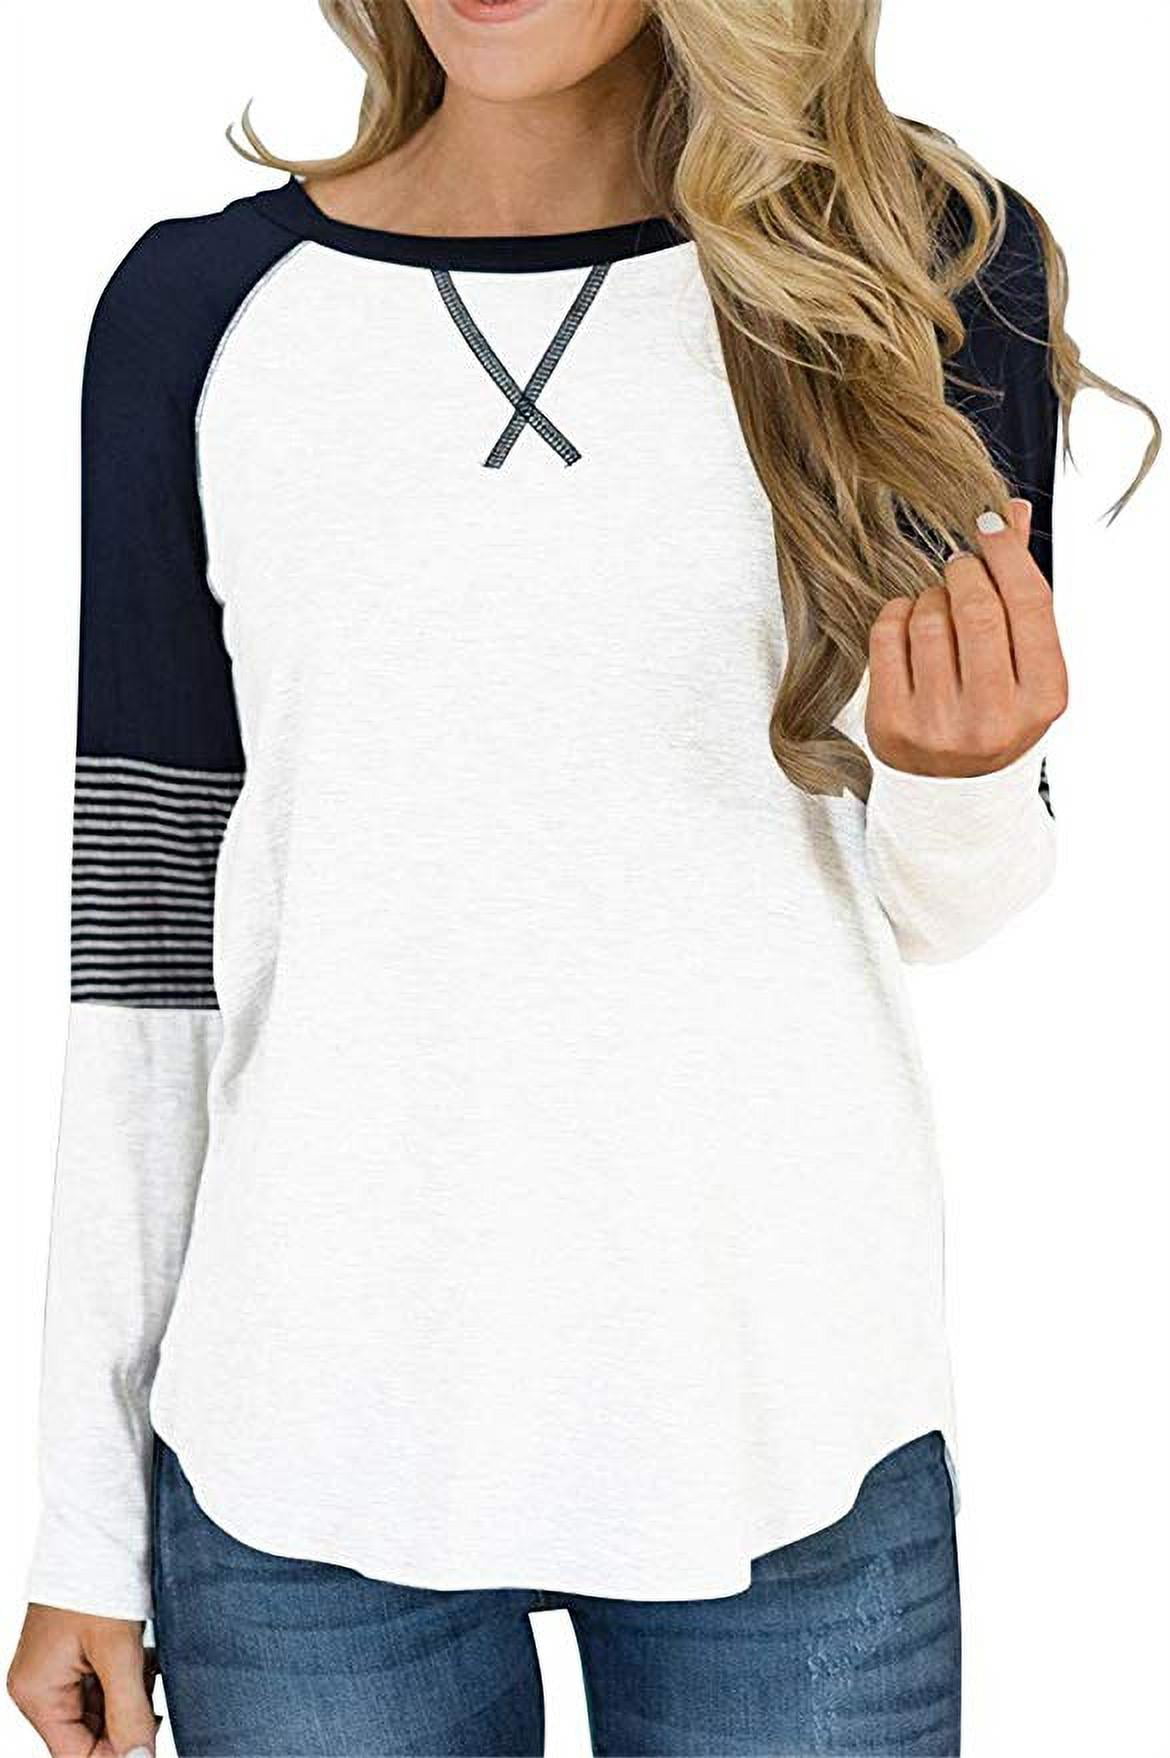 Dearlovers Womens Casual Round Neck Long Sleeve Color Block Loose Tunics Shirts Tops 